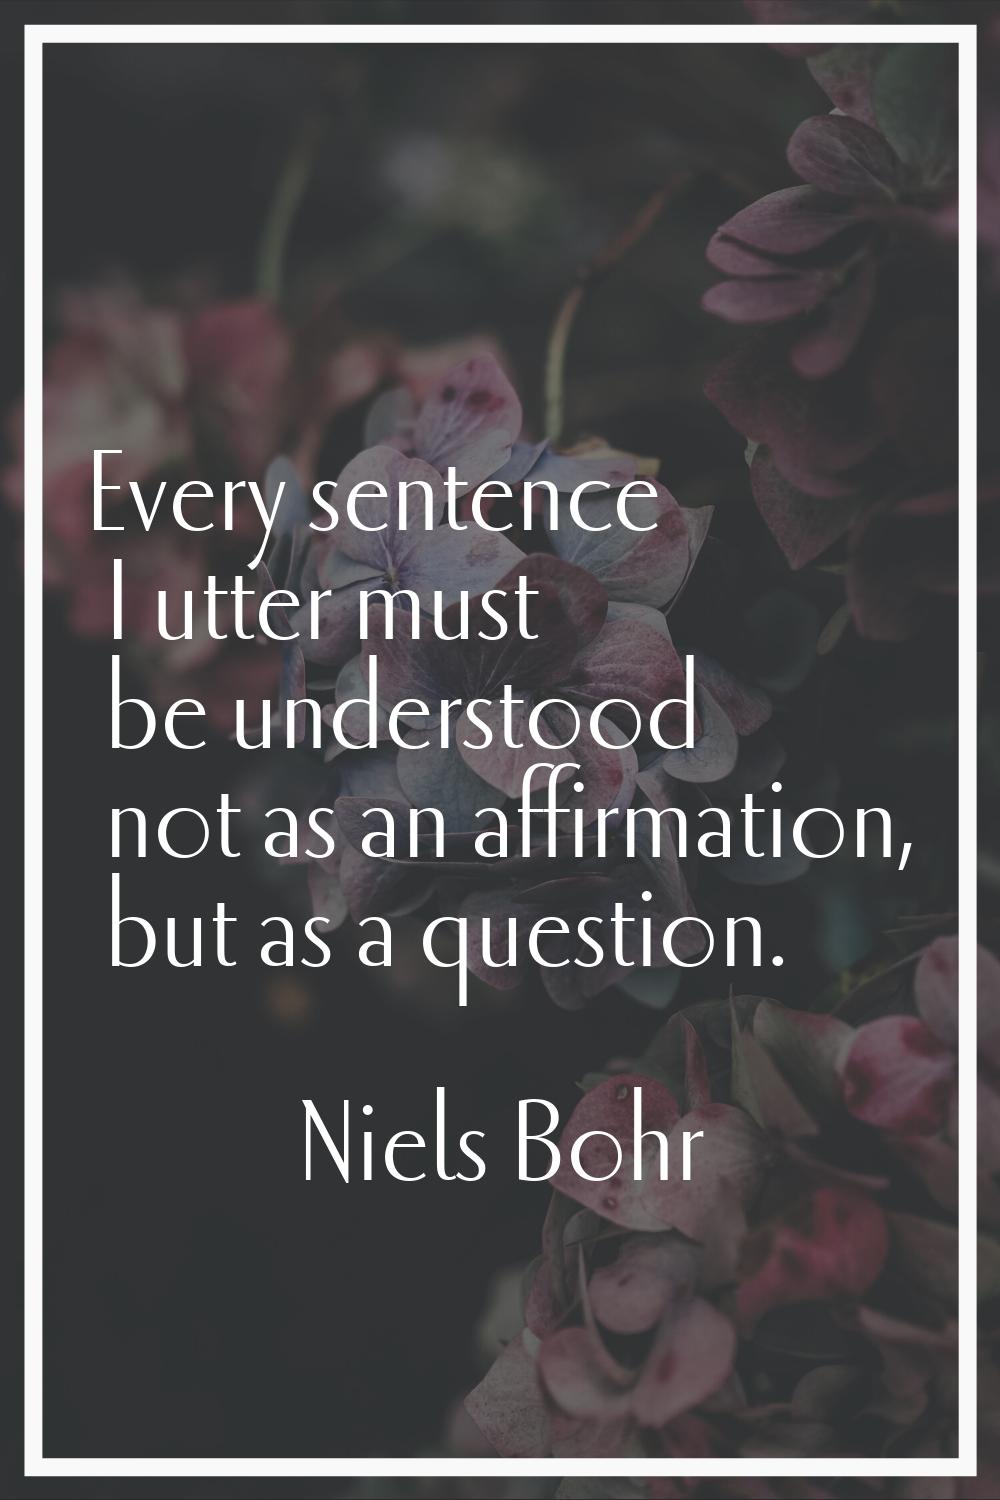 Every sentence I utter must be understood not as an affirmation, but as a question.